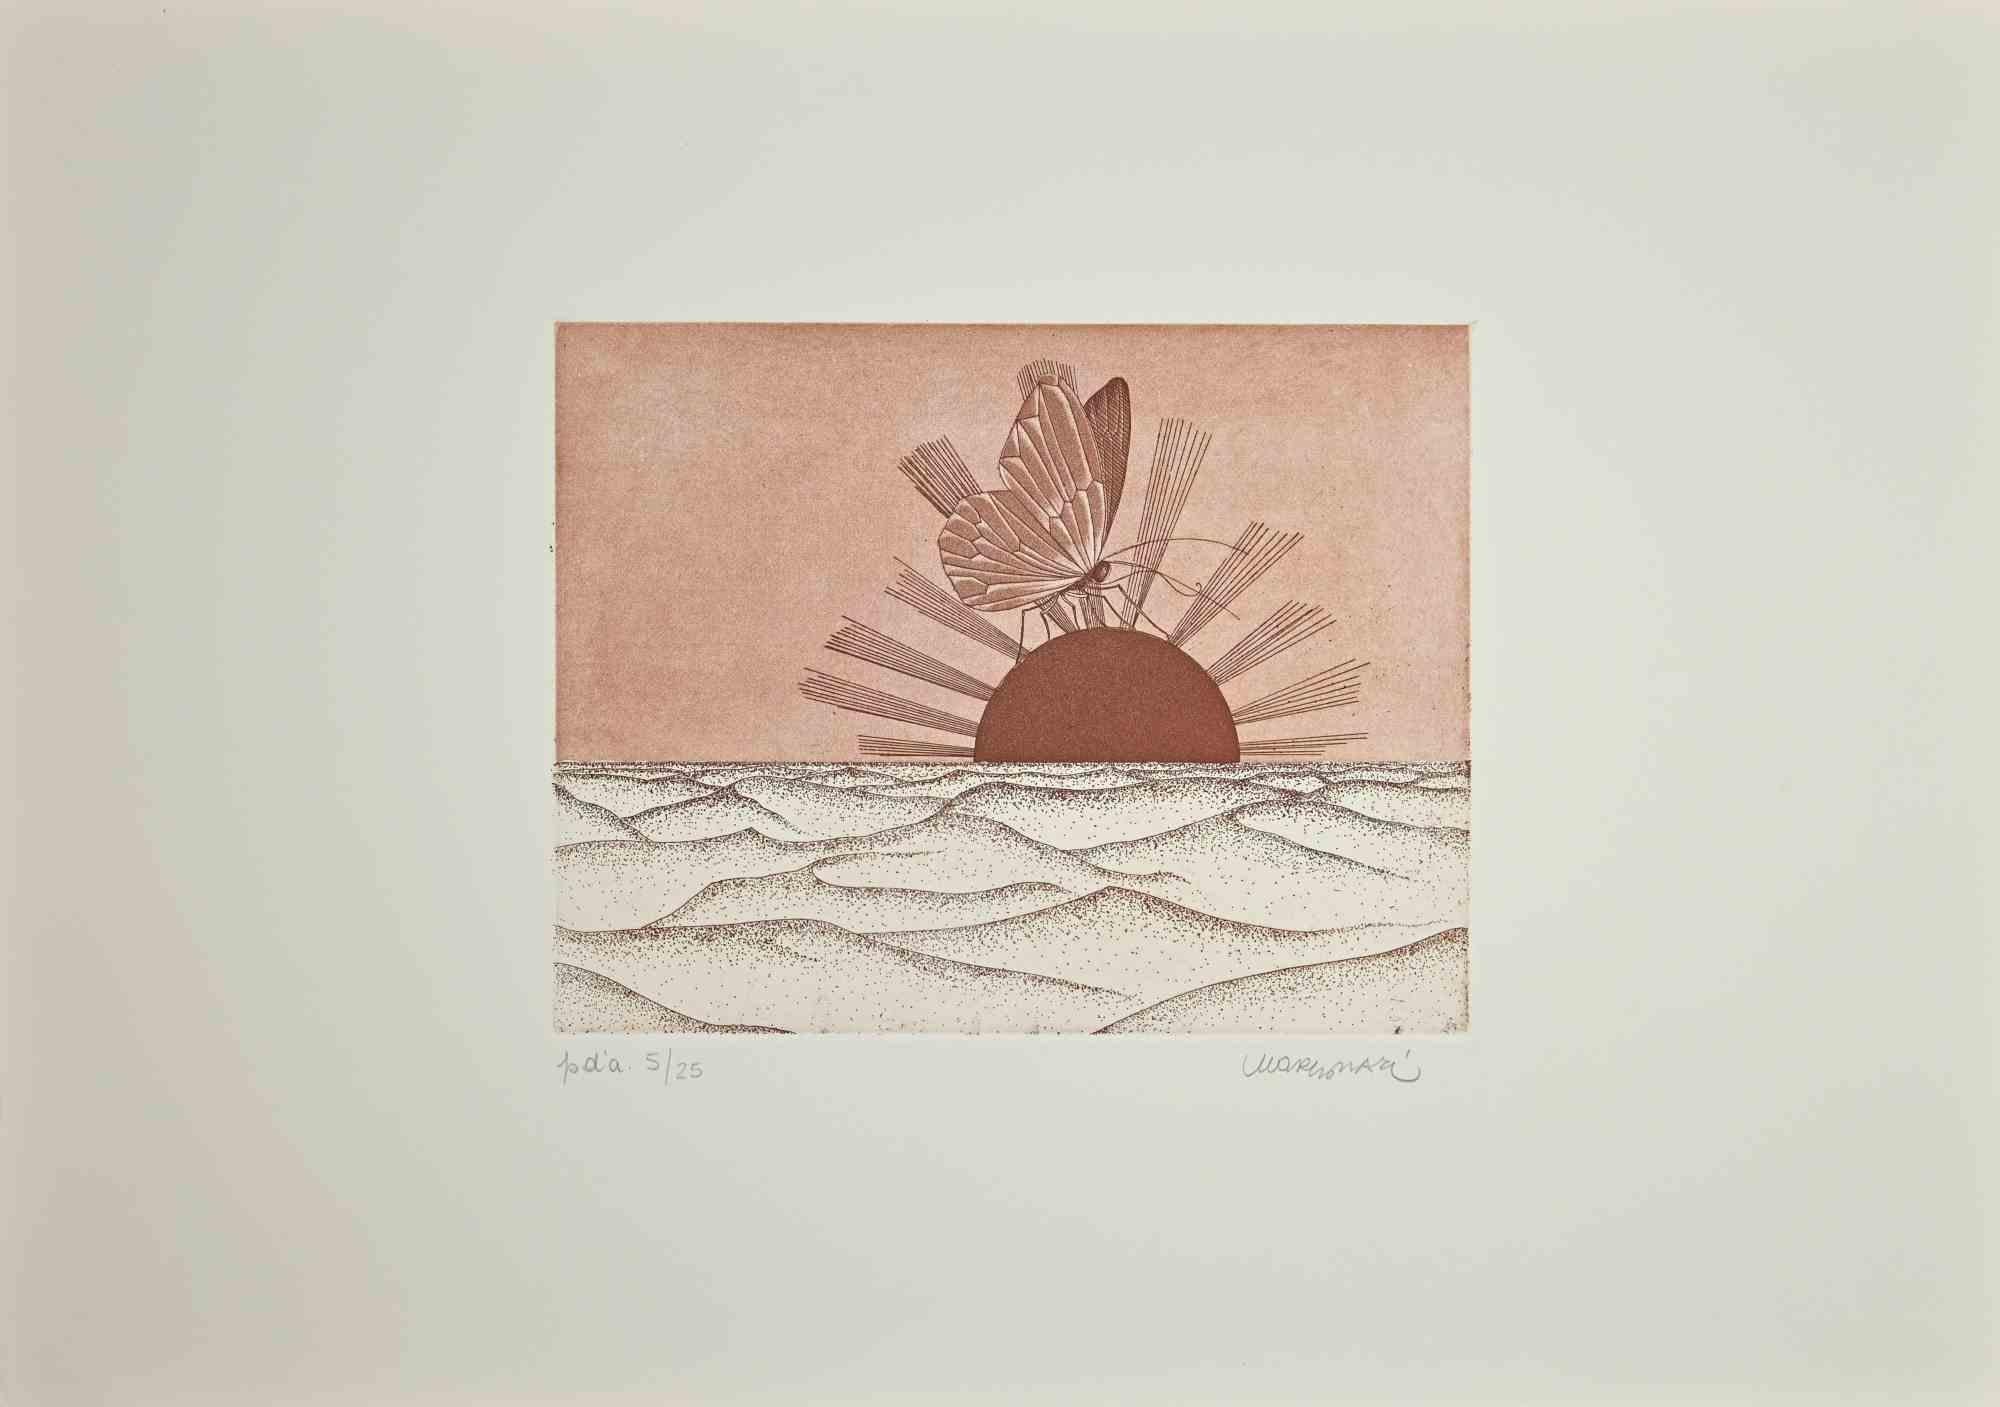 Butterfly in the Desert is an original Contemporary Artwork realized in 1980 by Renzo Margorari (Mantua, 1937).

Original Colored Etching on paper. 

Artist's Proof.

Hand-signed in pencil by the artist on the lower right corner: Margonari. Numbered